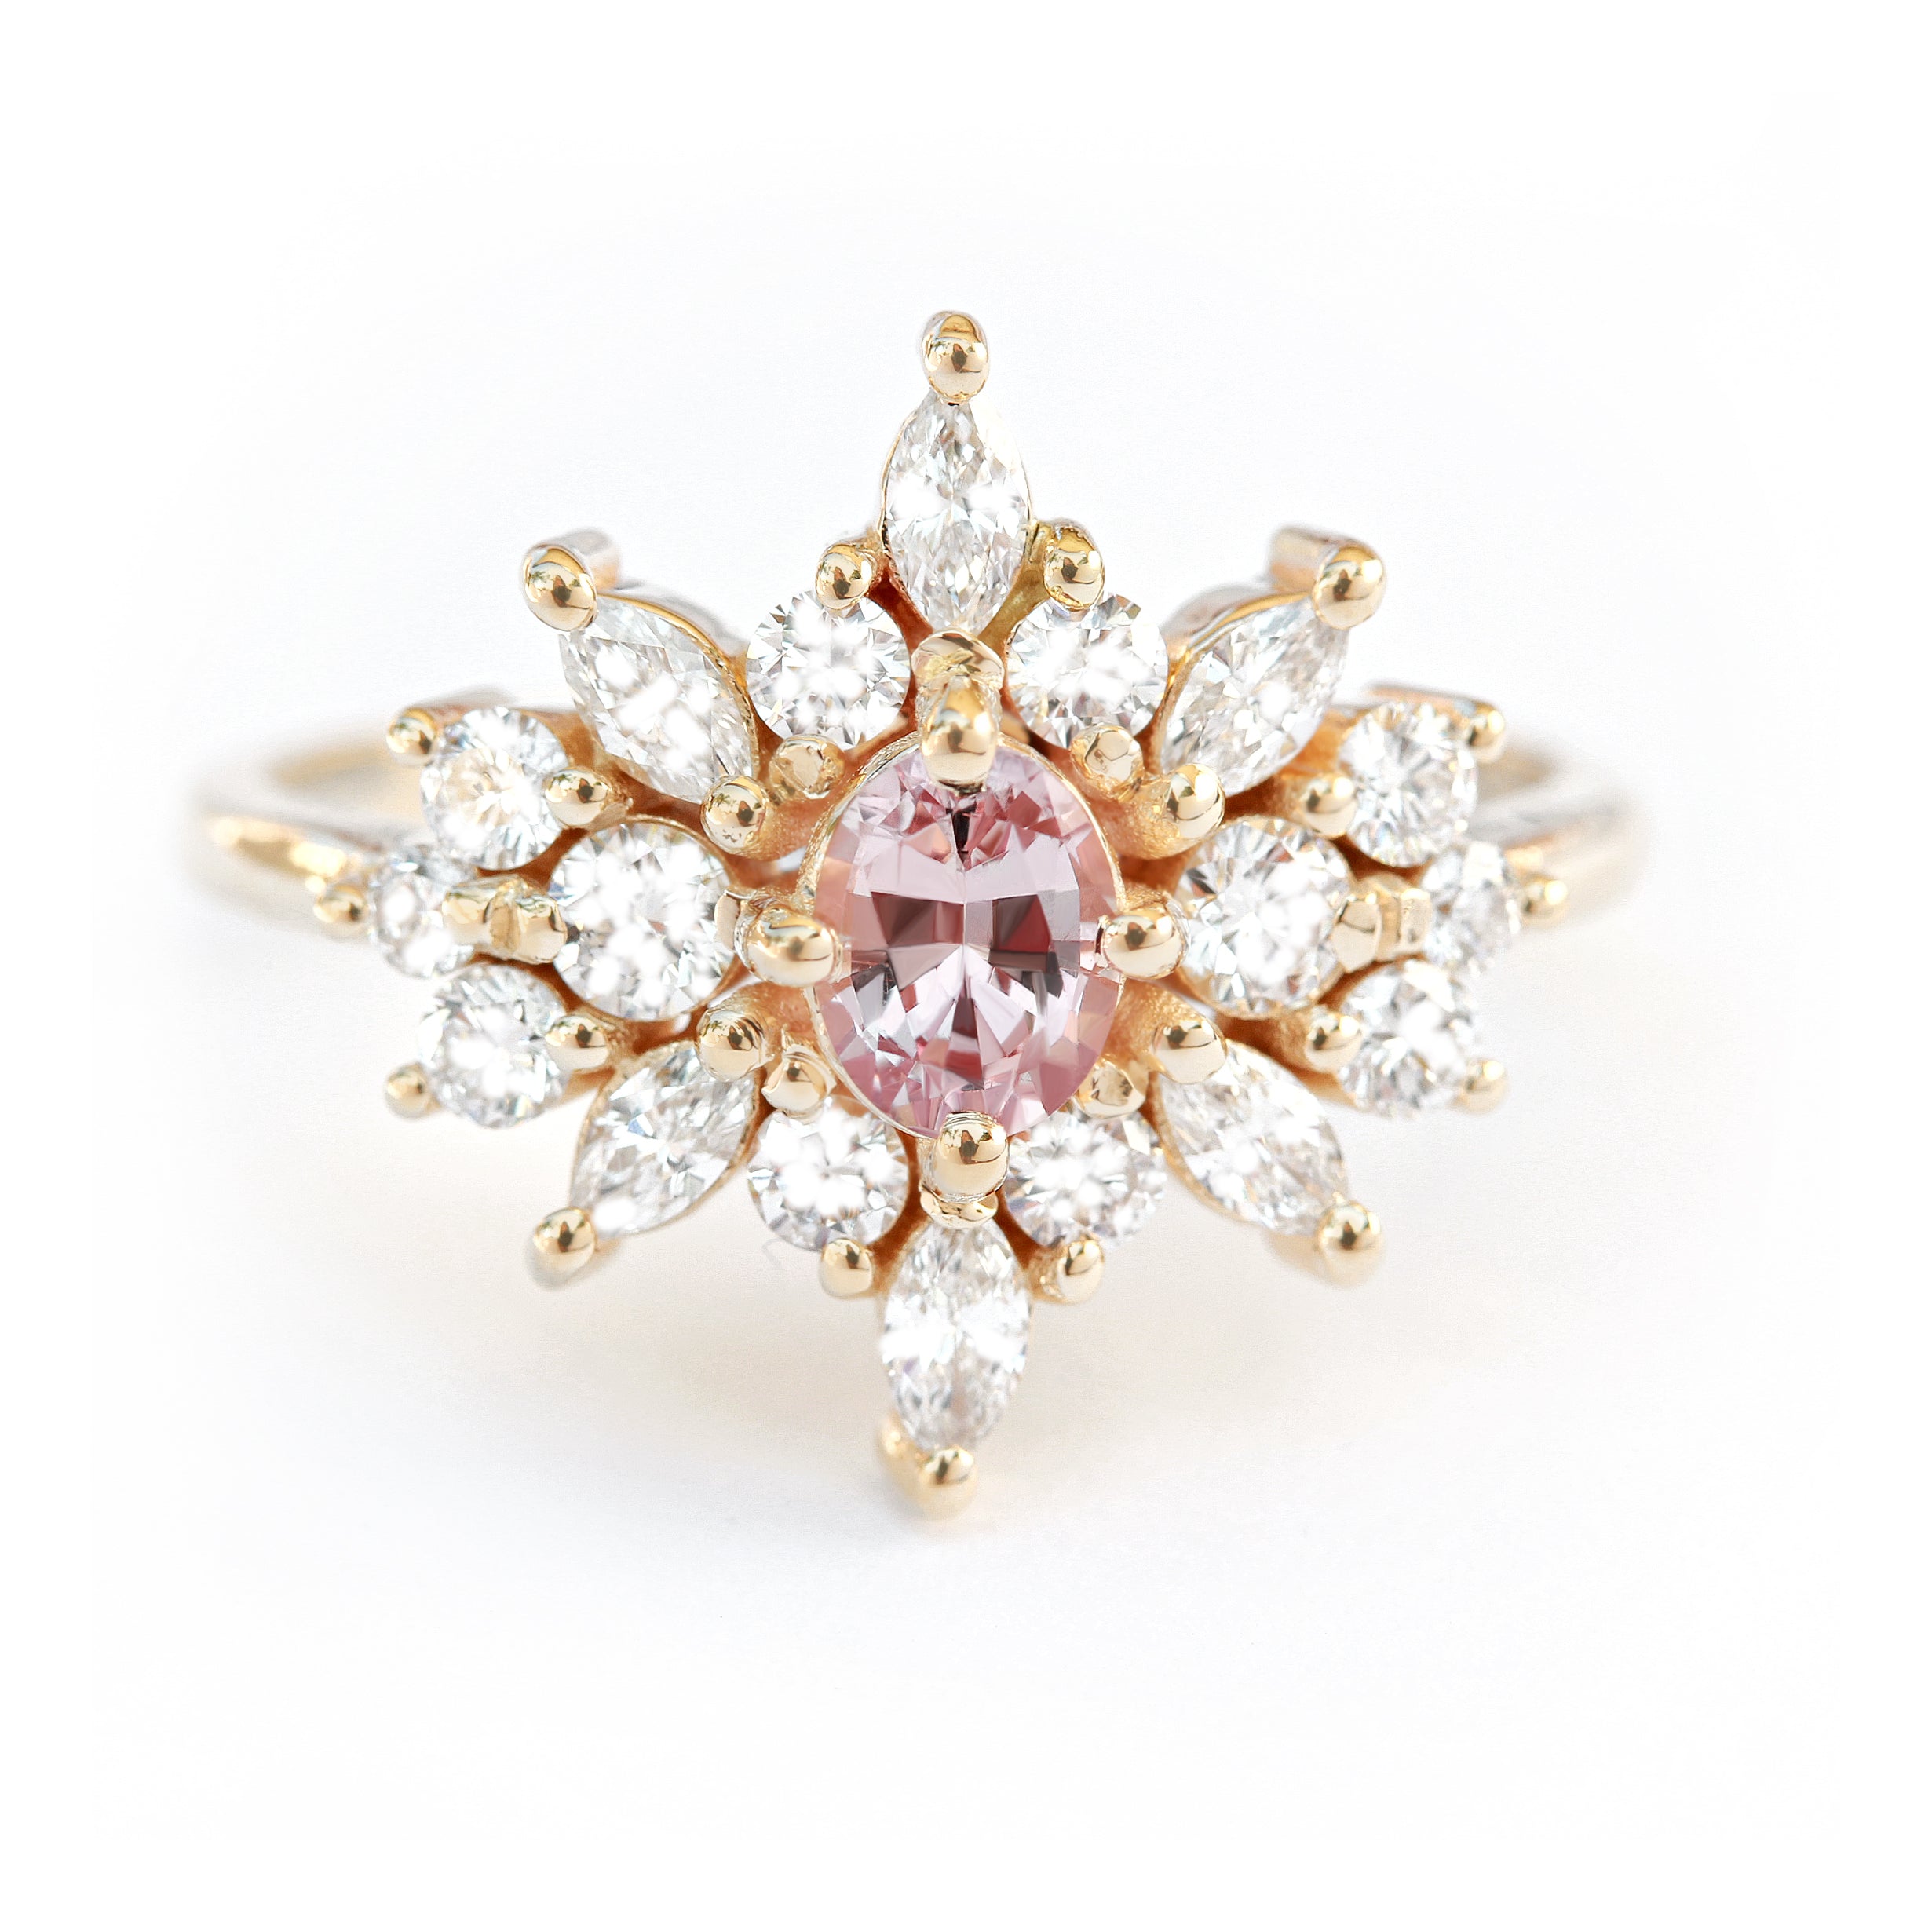 Oval pink sapphire engagement Ring, Phoenix. 14K yellow gold, size 6.5 ♥